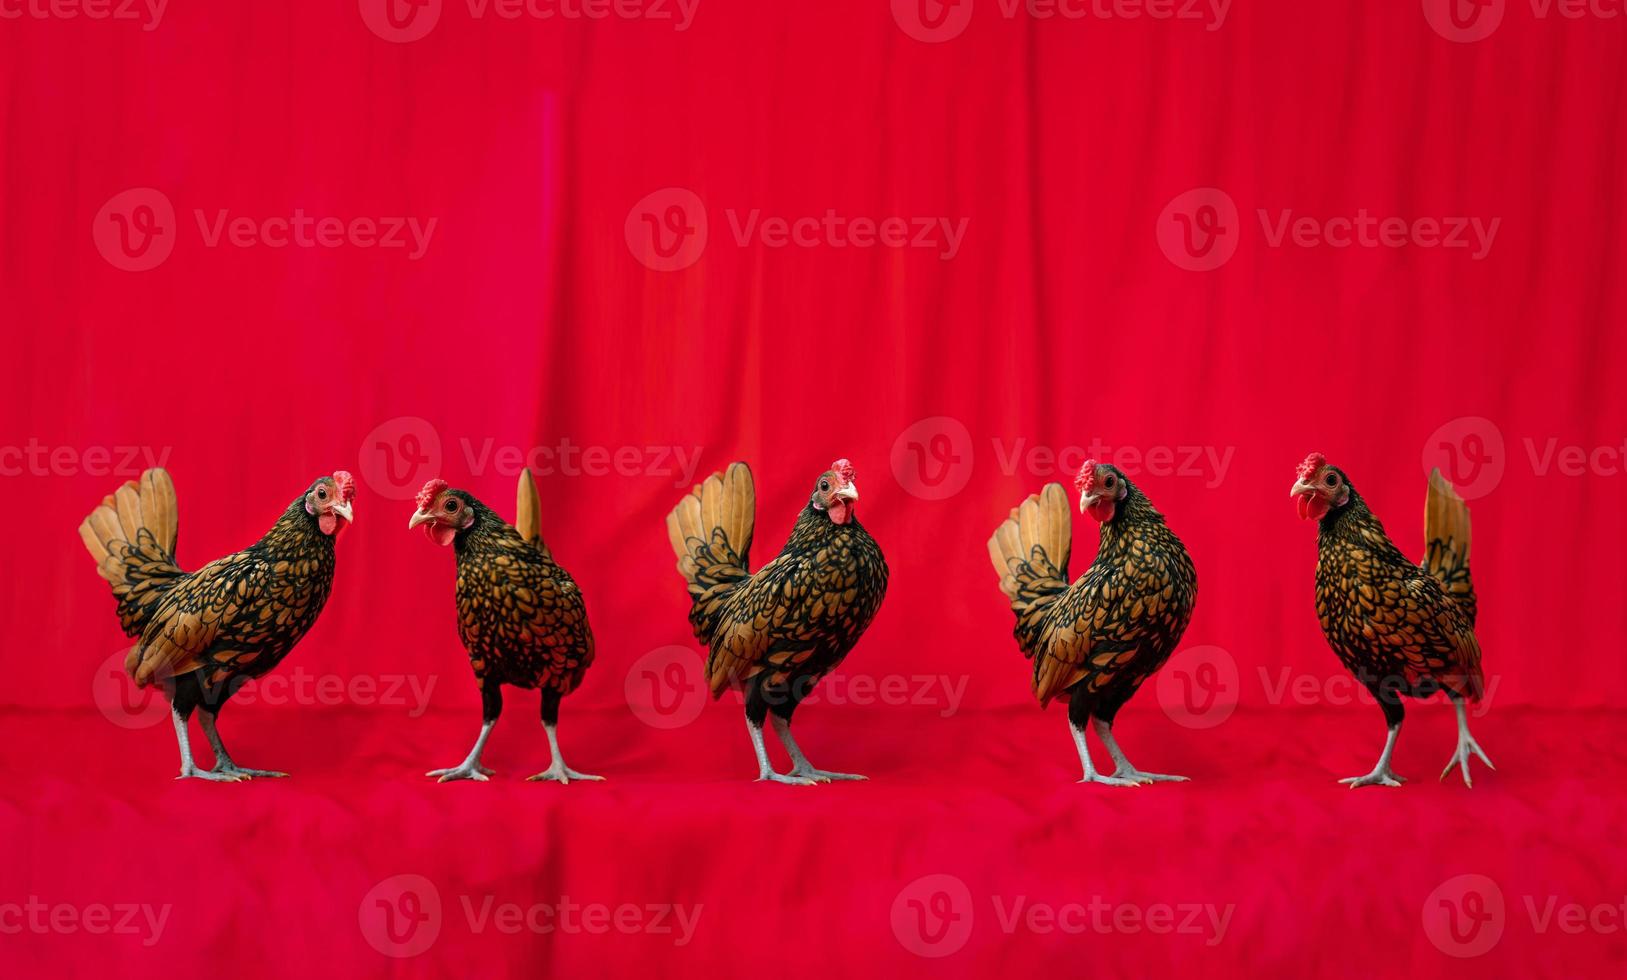 5 SeBright Chicken Team stands in the row in front of the red cloth background. photo